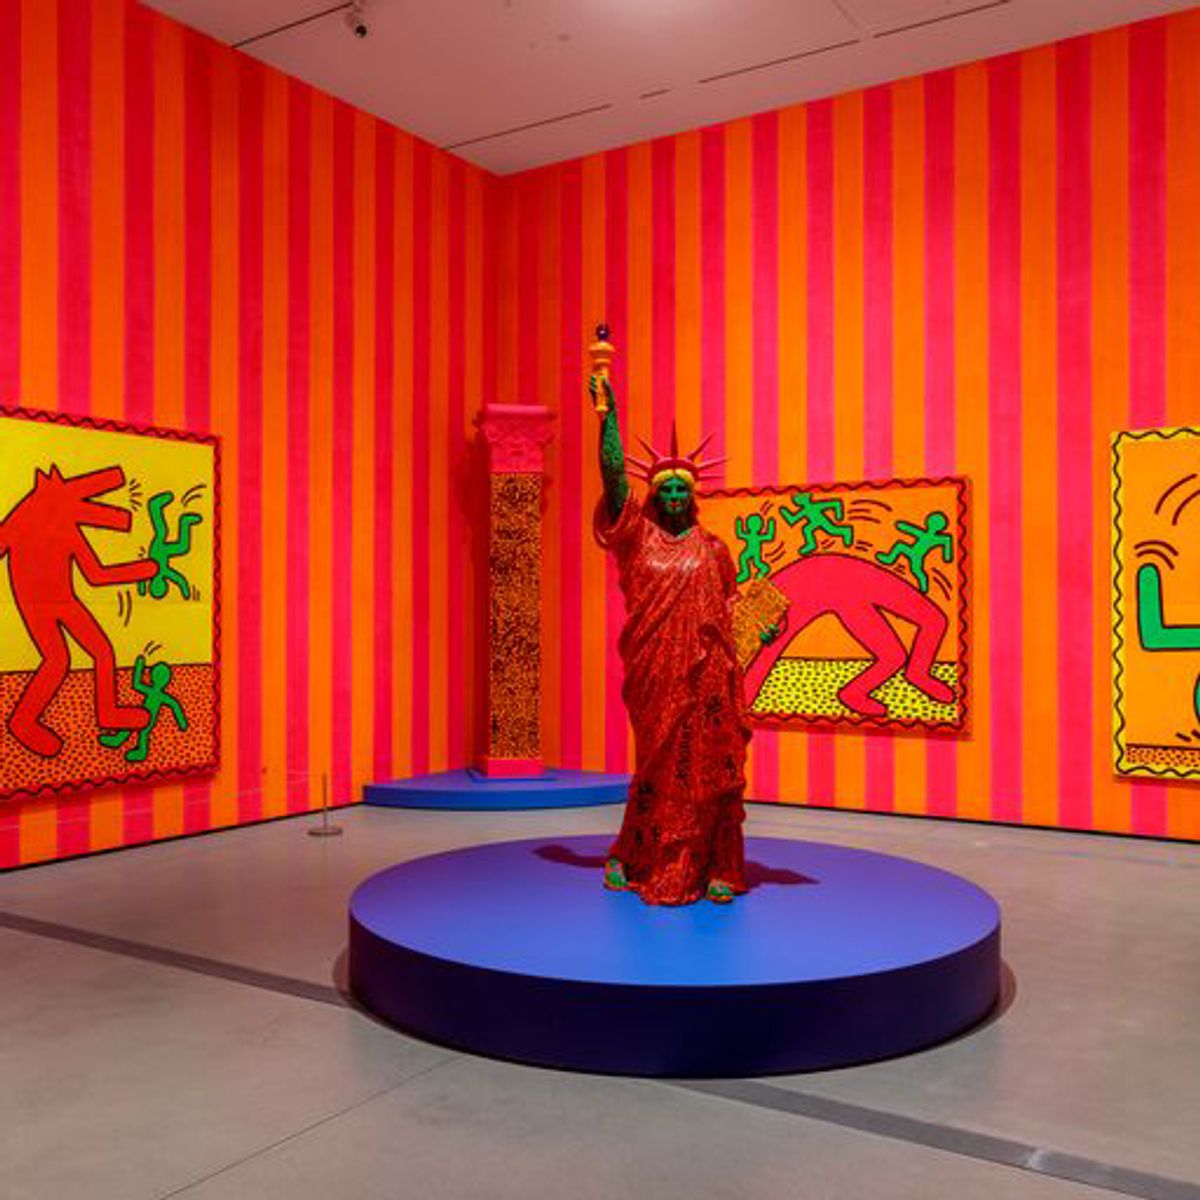 Podcast Keith Haring's first time in Los Angeles The Week in Art